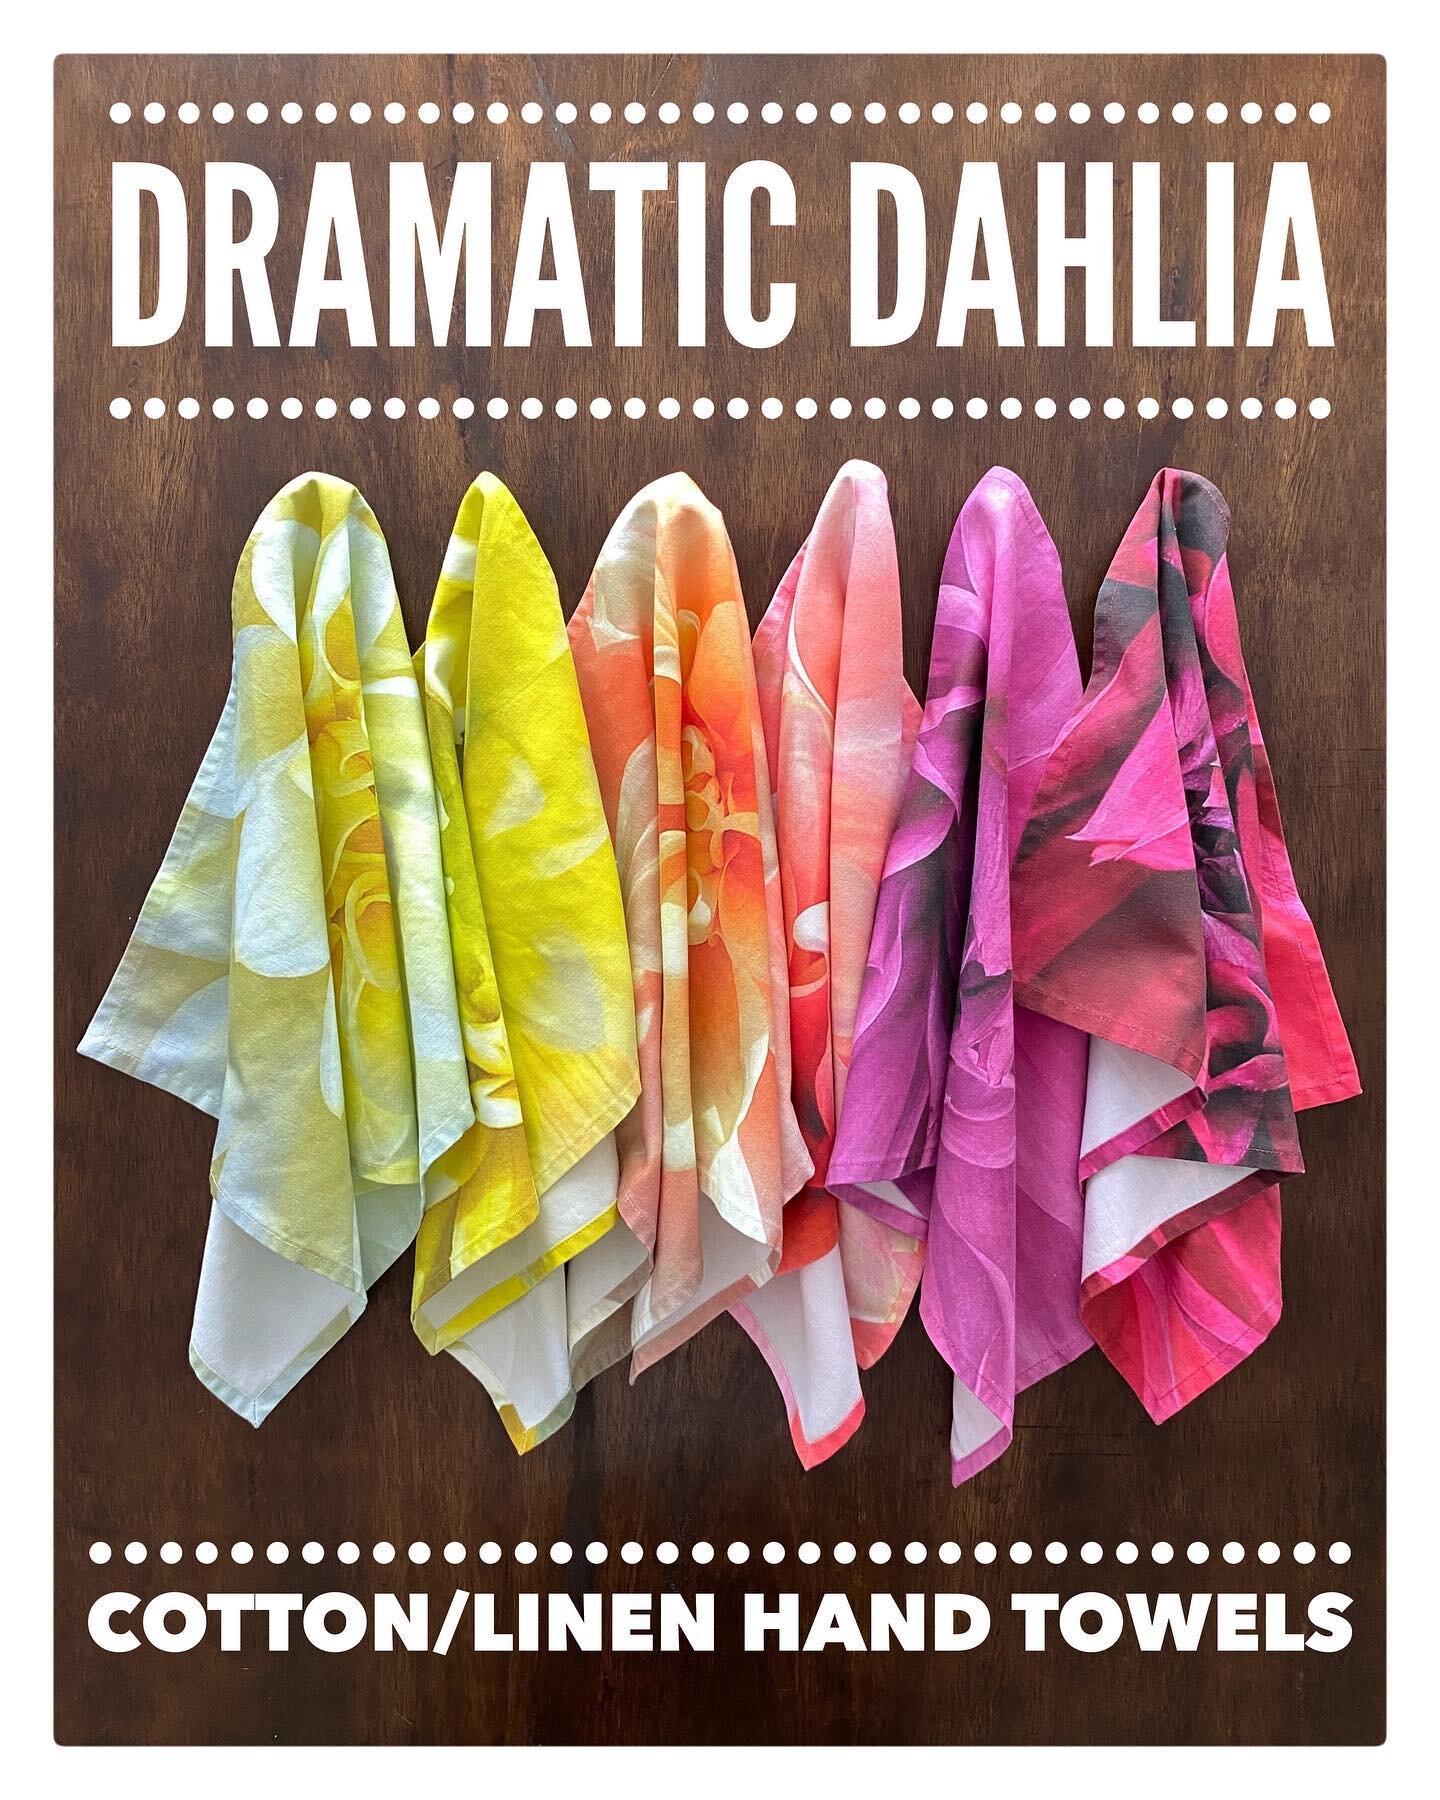 PRODUCT SPOTLIGHT

Dramatic Dahlia Hand Towels

I photographed dahlias from my garden and had them digitally printed on crisp, natural white cotton/linen canvas. The results are almost like watercolor paintings. With the durability of linen and the s